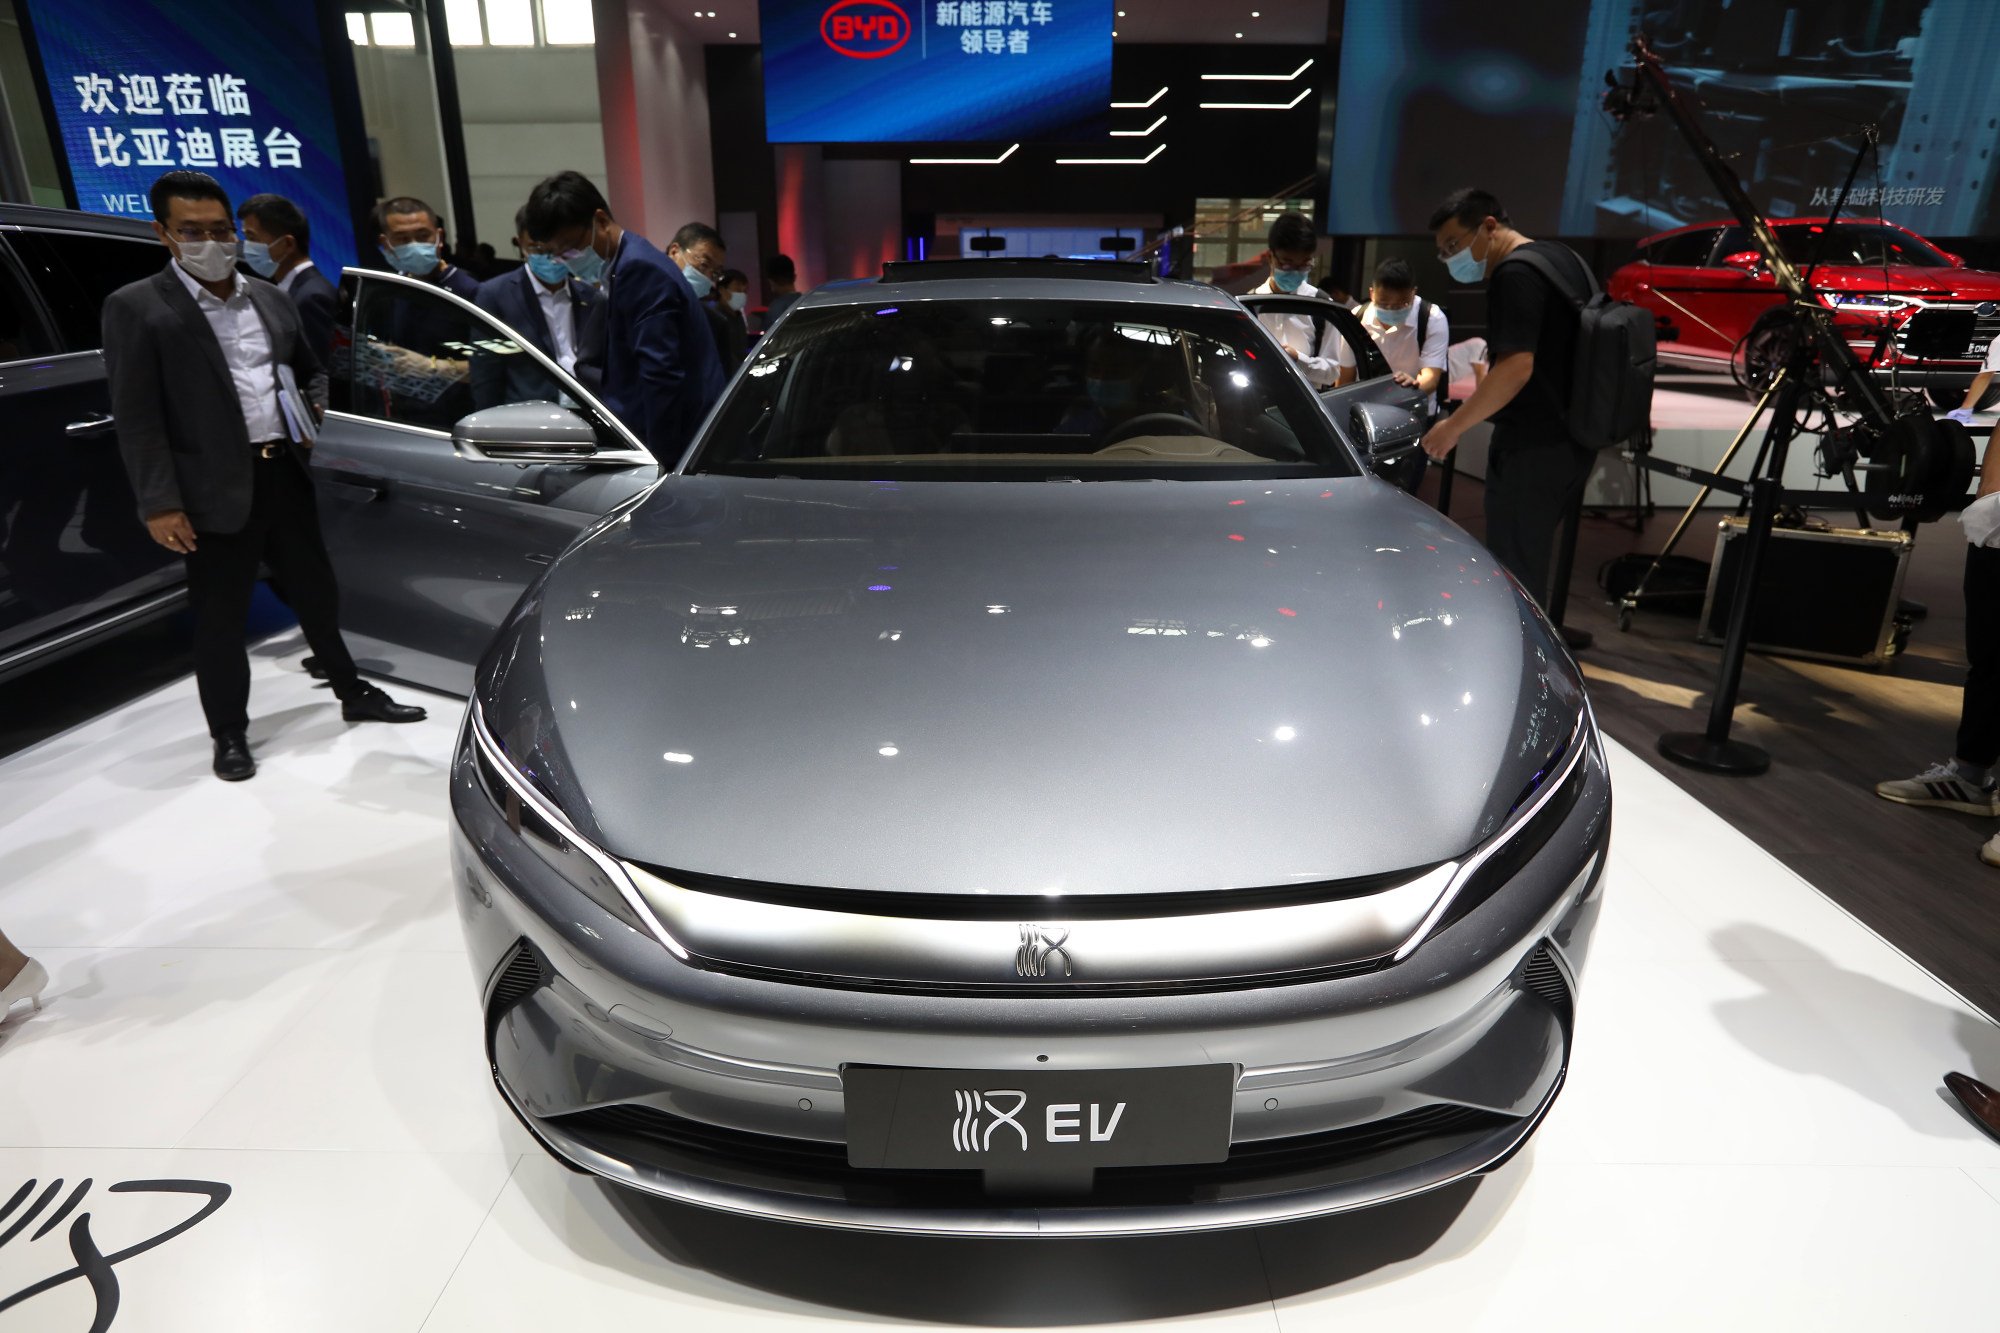 BYD’s all-electric Han EV at the Auto China 2020 trade show in Beijing on September 26, 2020. Photo: Simon Song.